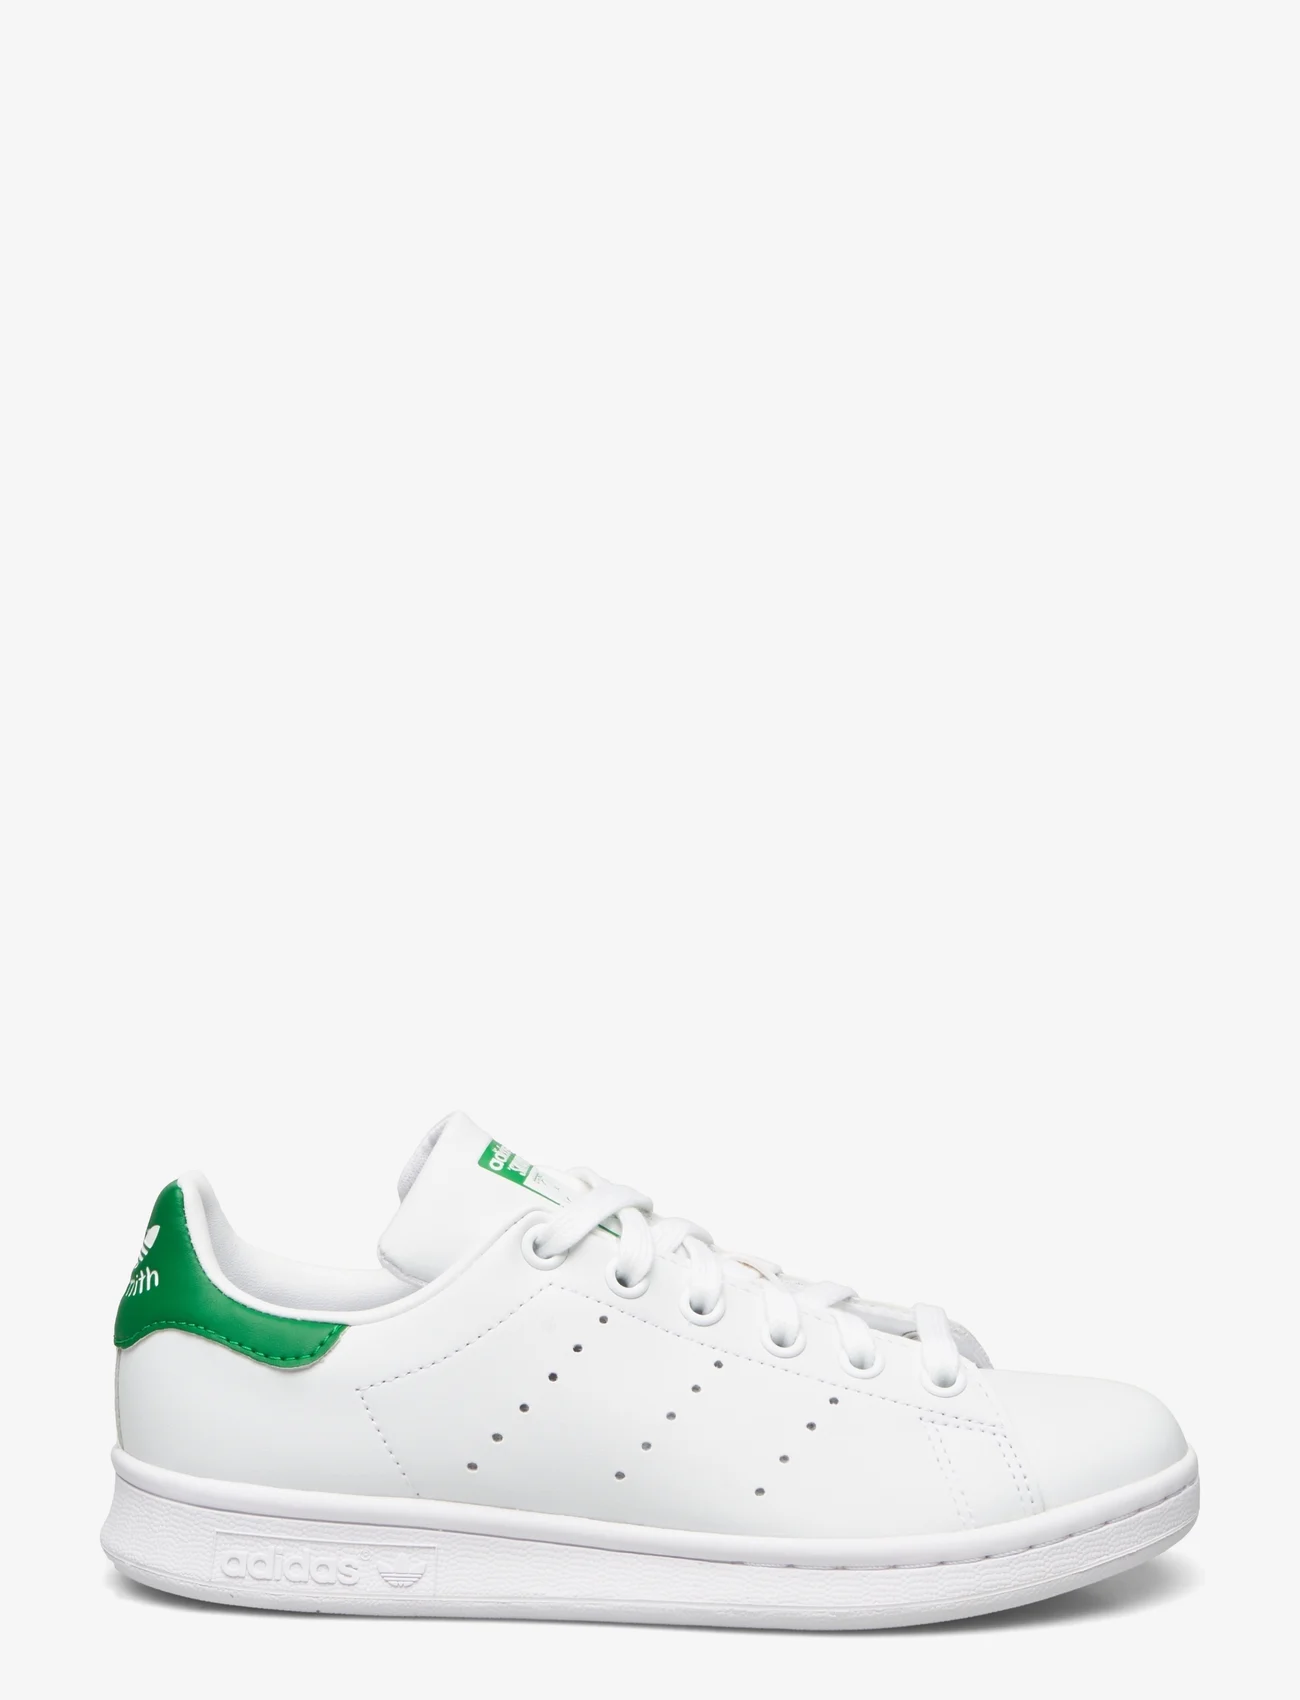 adidas Originals - STAN SMITH W - lage sneakers - ftwwht/green/ftwwht - 1